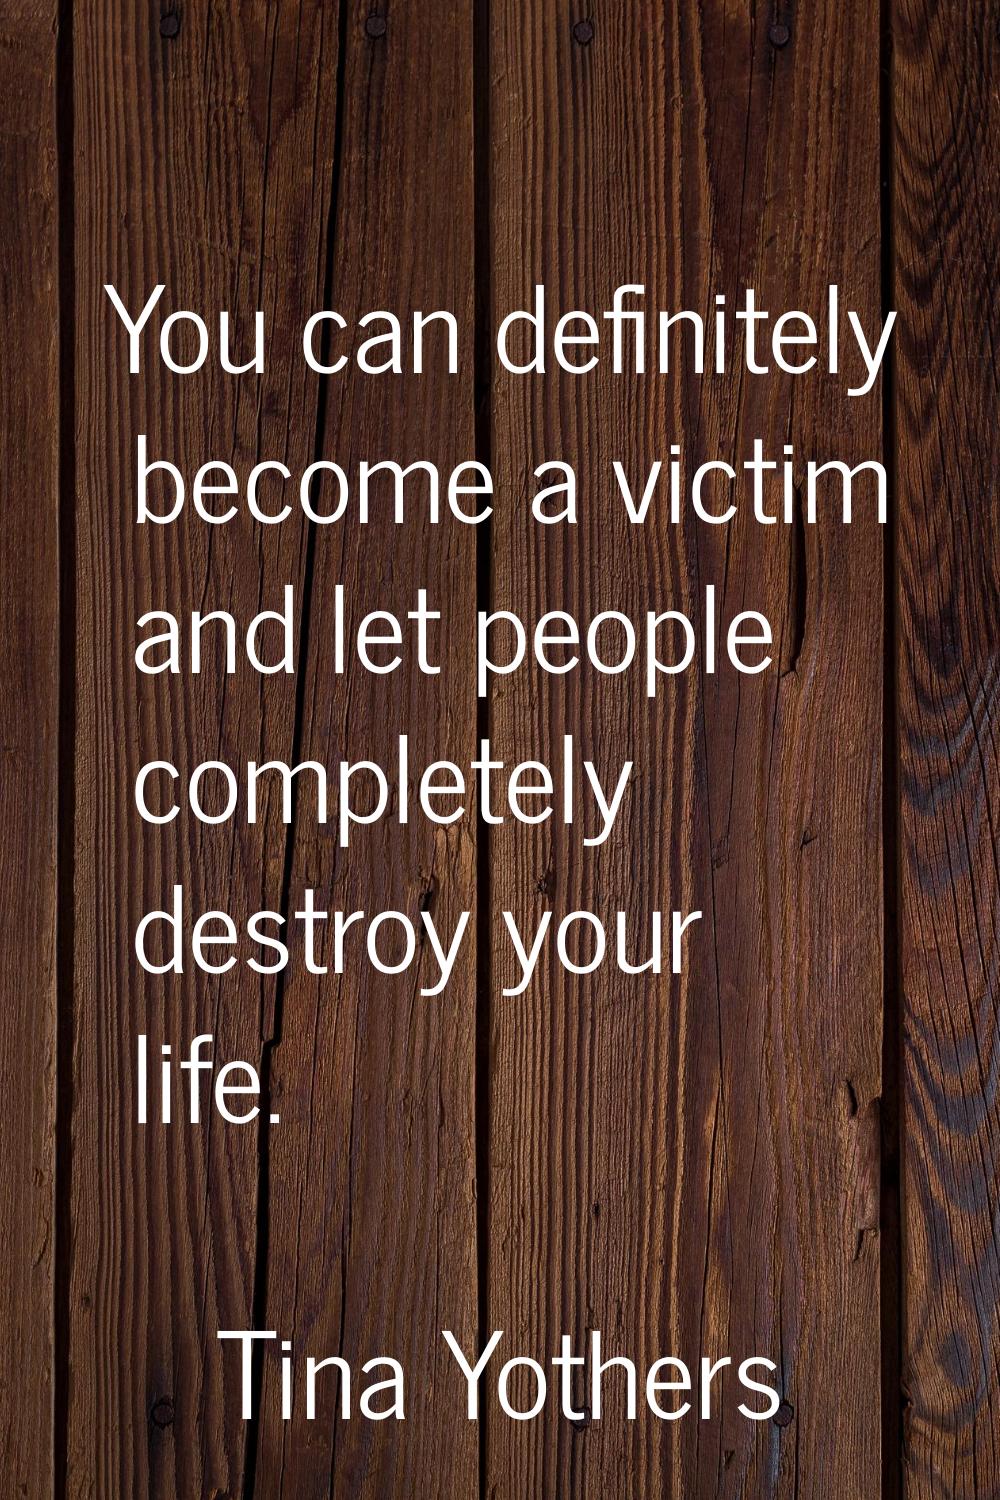 You can definitely become a victim and let people completely destroy your life.